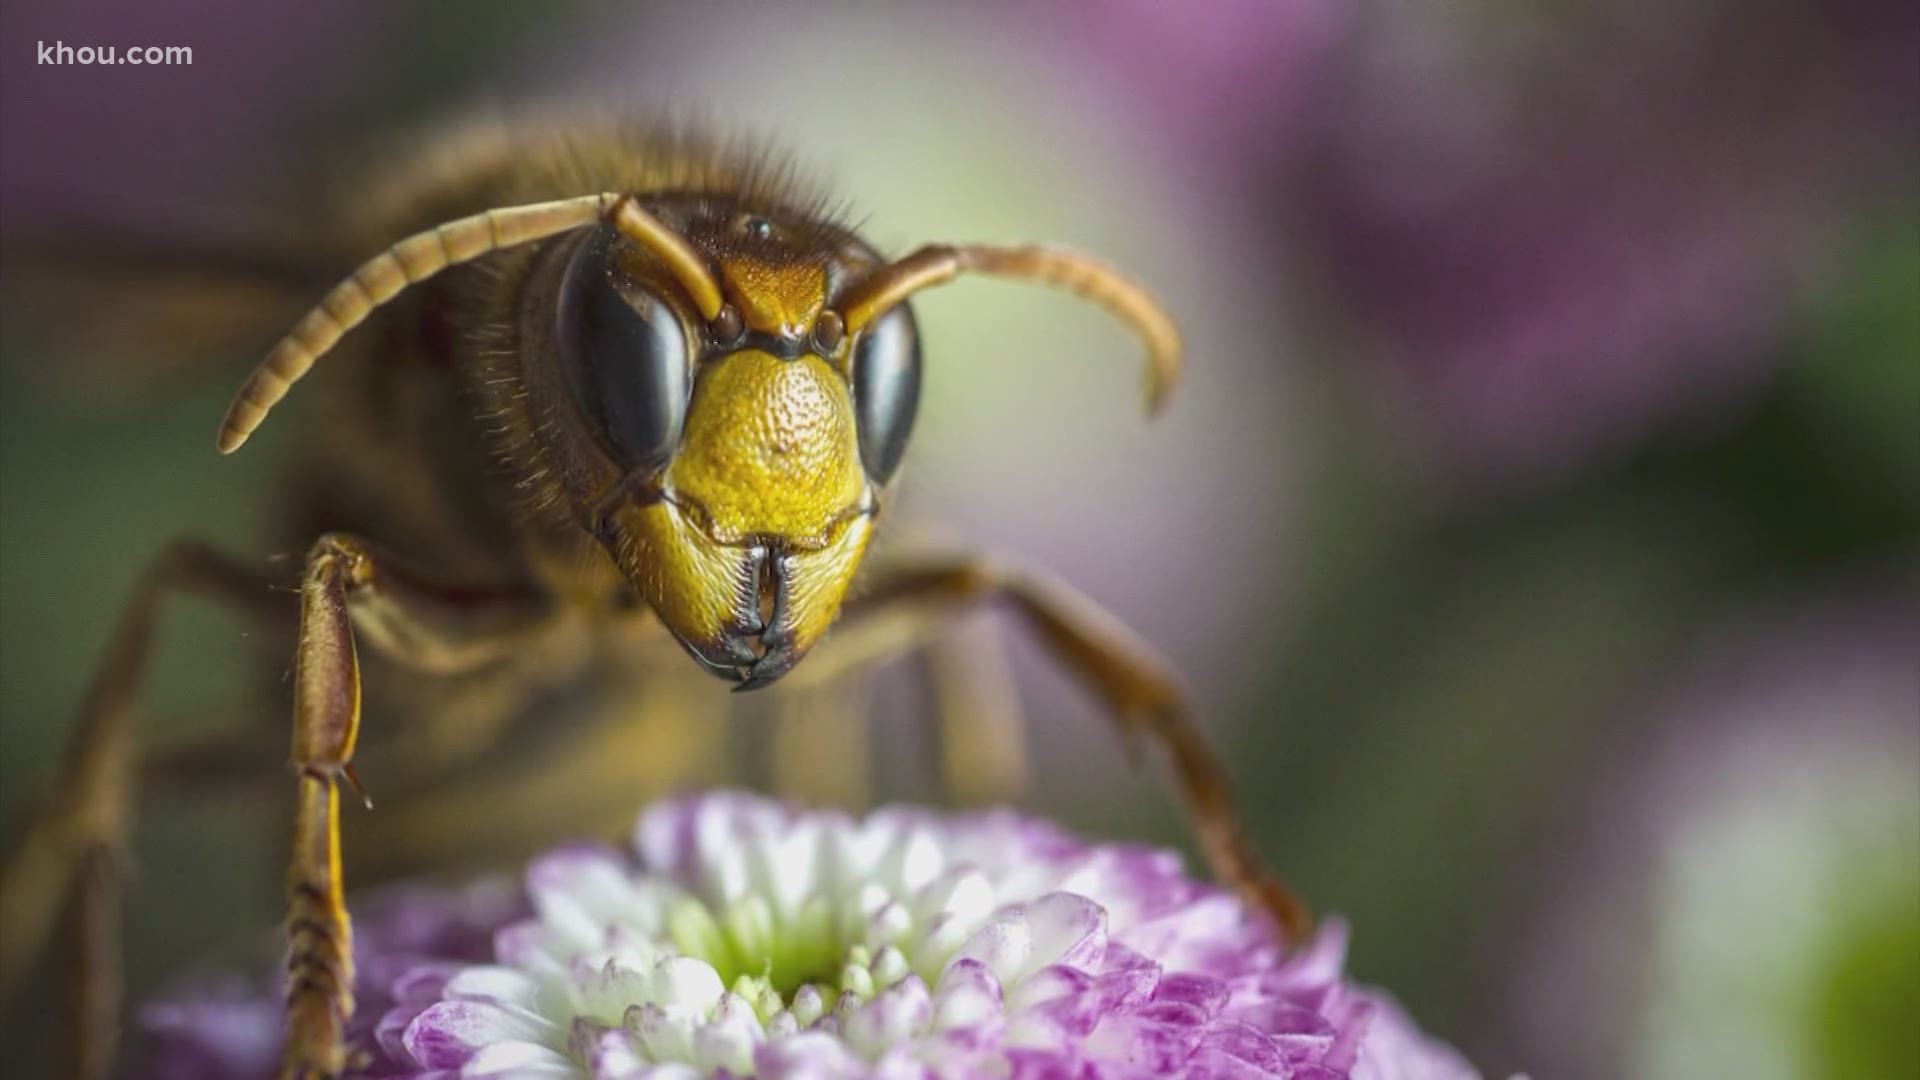 Asian giant hornets, now popularly referred to as 'murder hornets', have got social media buzzing.